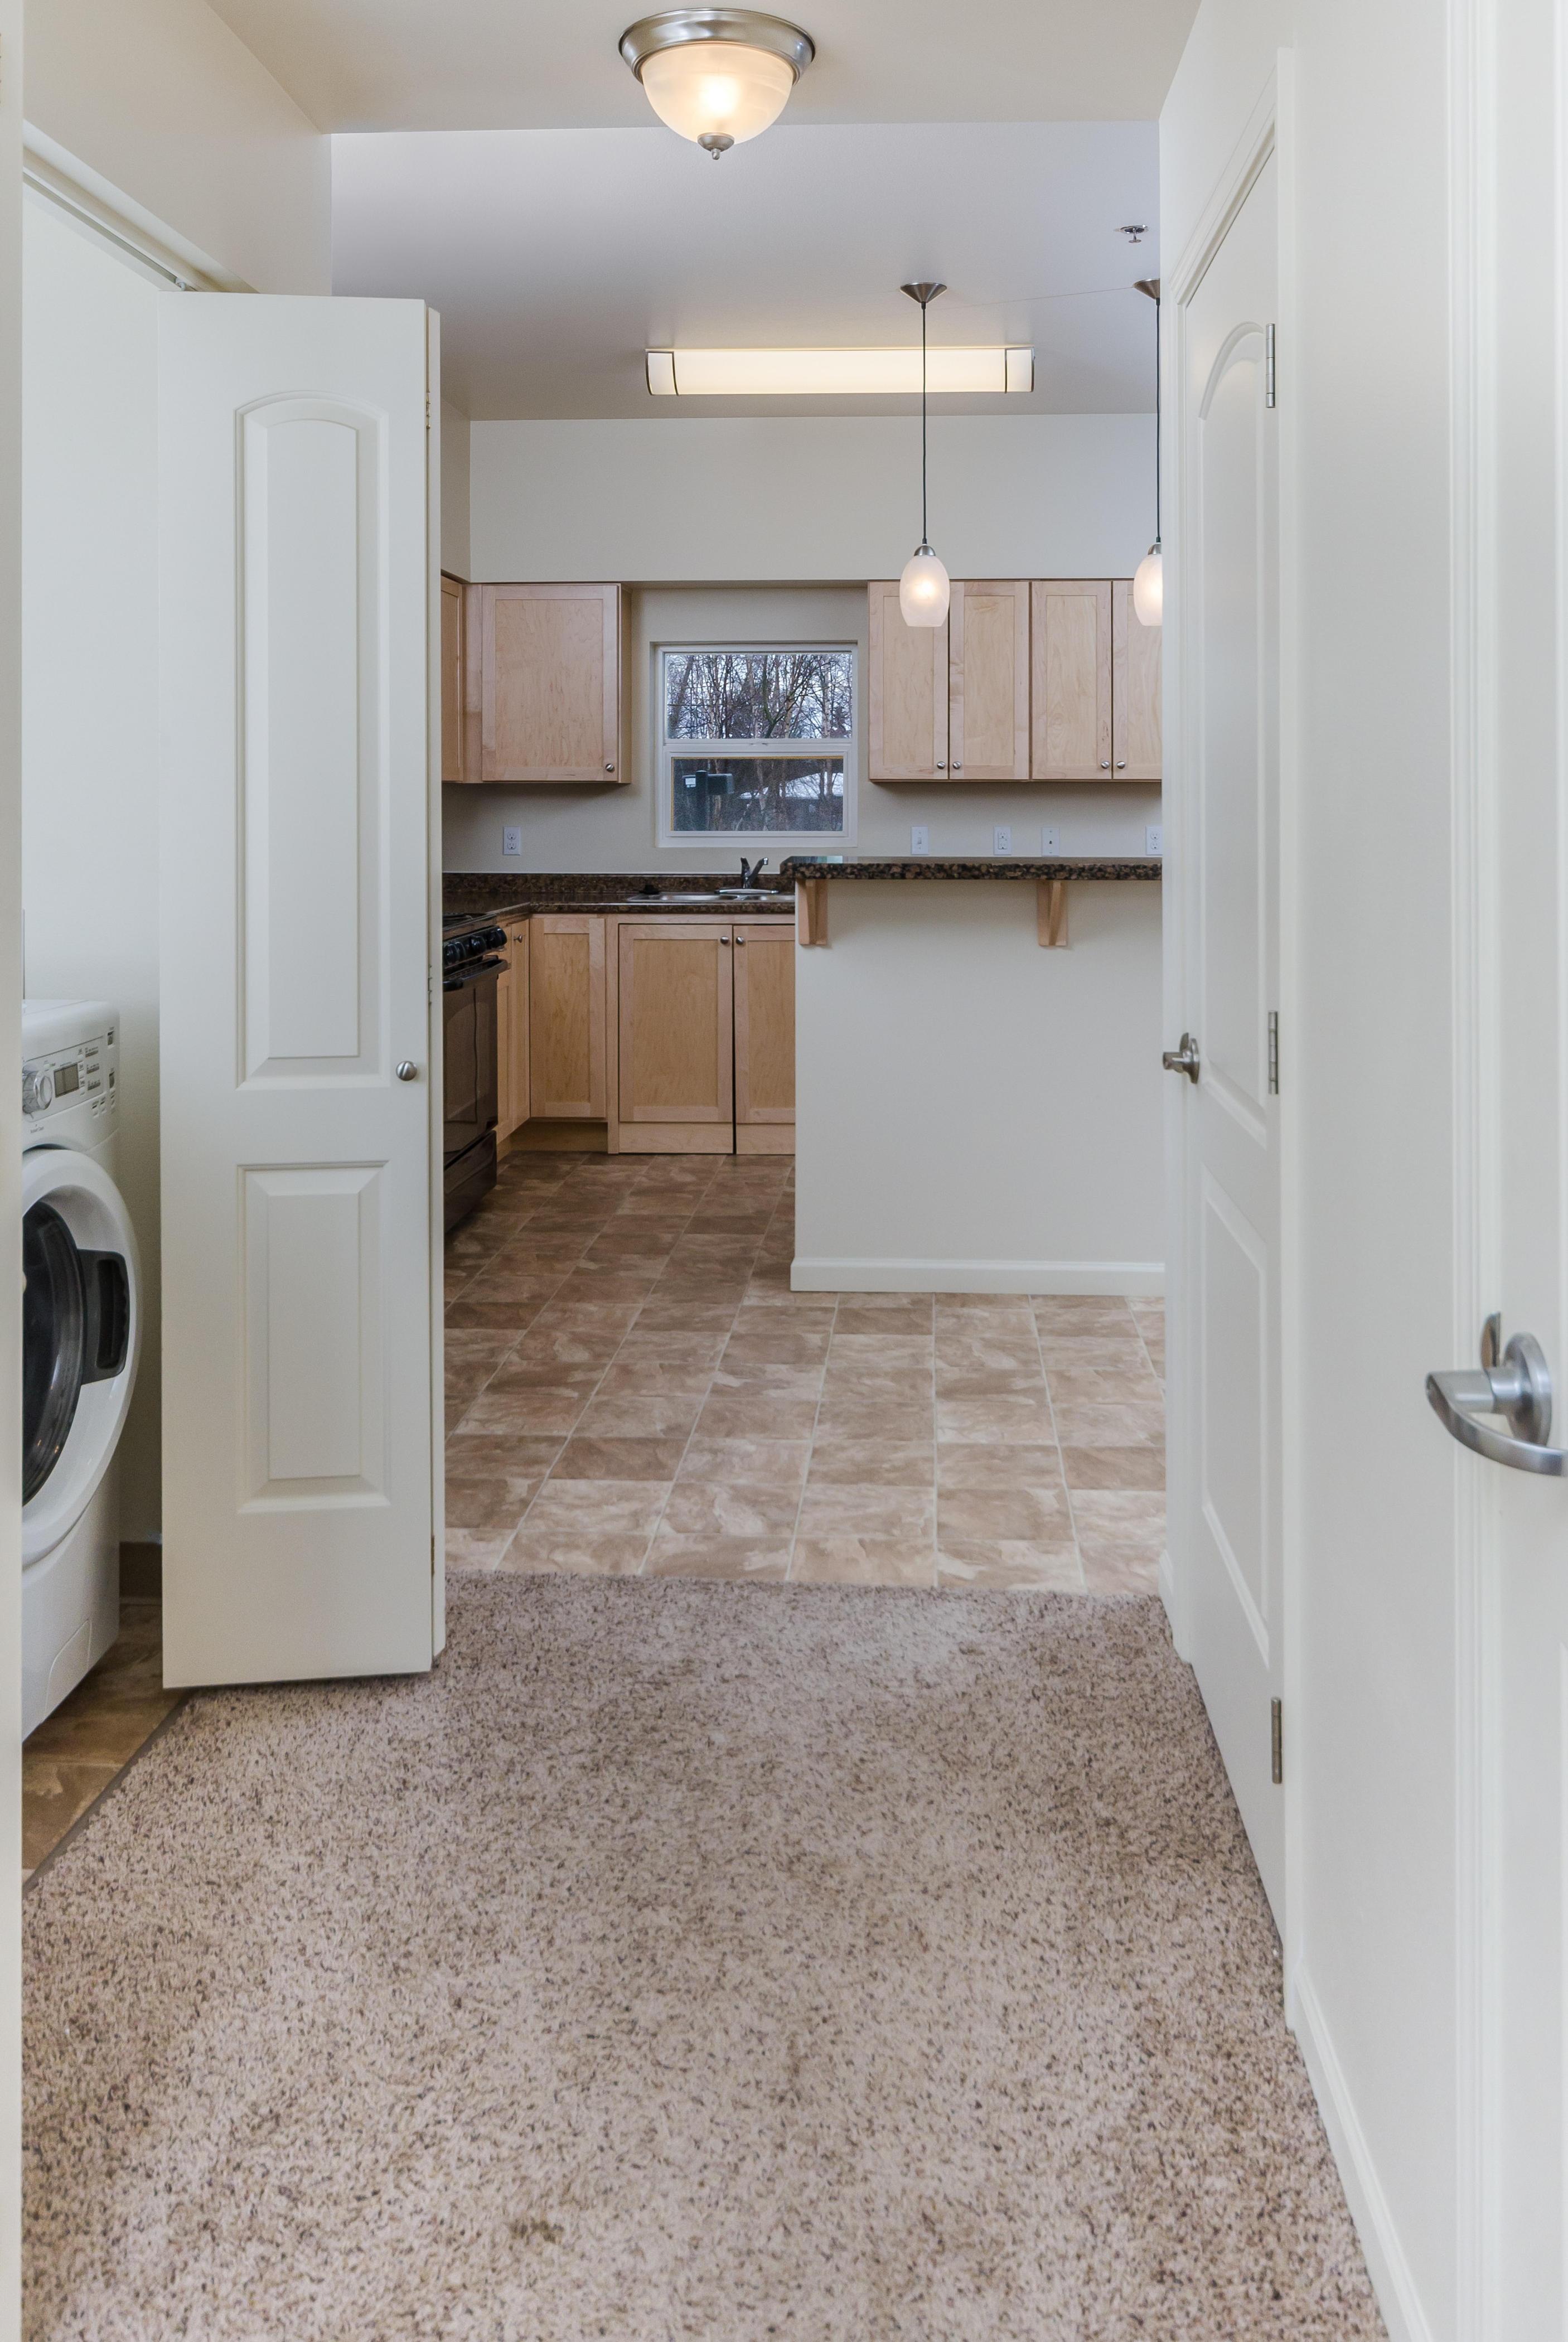 2BR Laundry Area and Tiled Kitchen